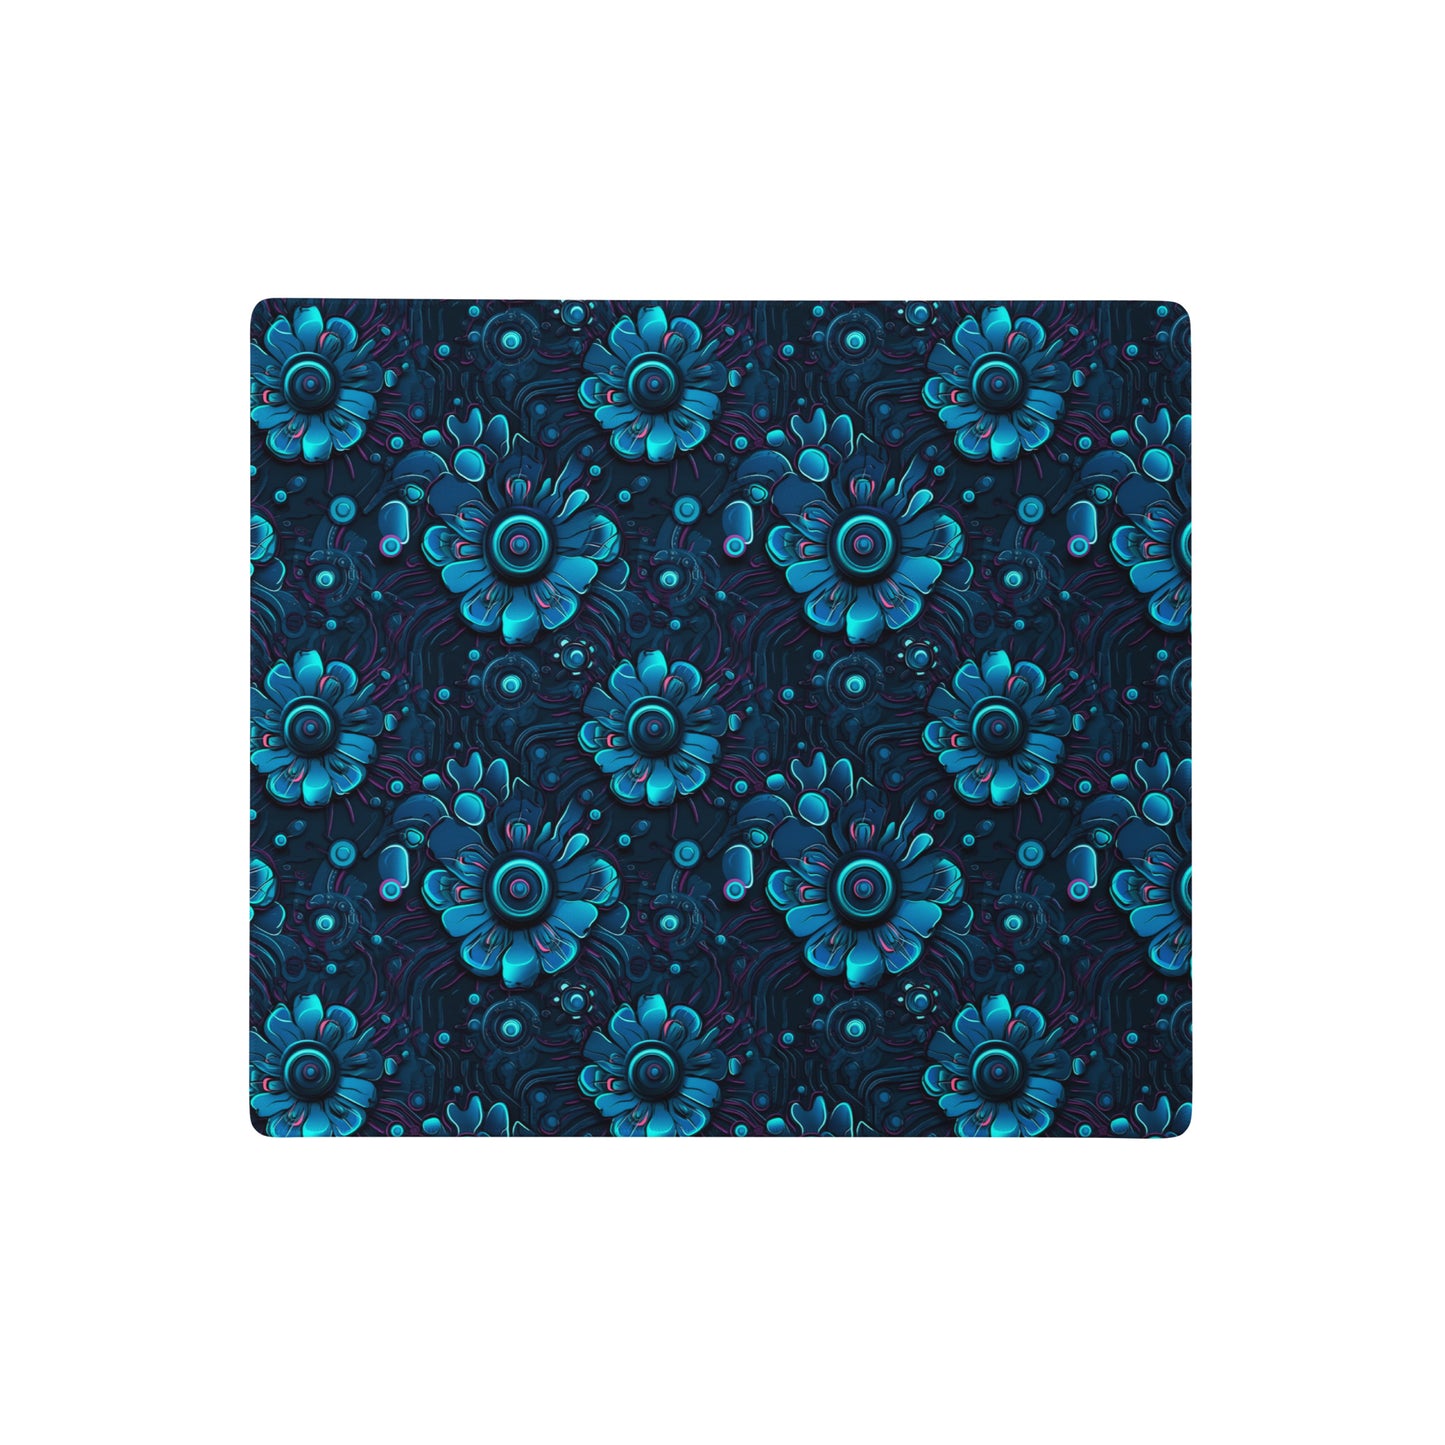 A 18" x 16" desk pad with a blue robotic floral pattern.